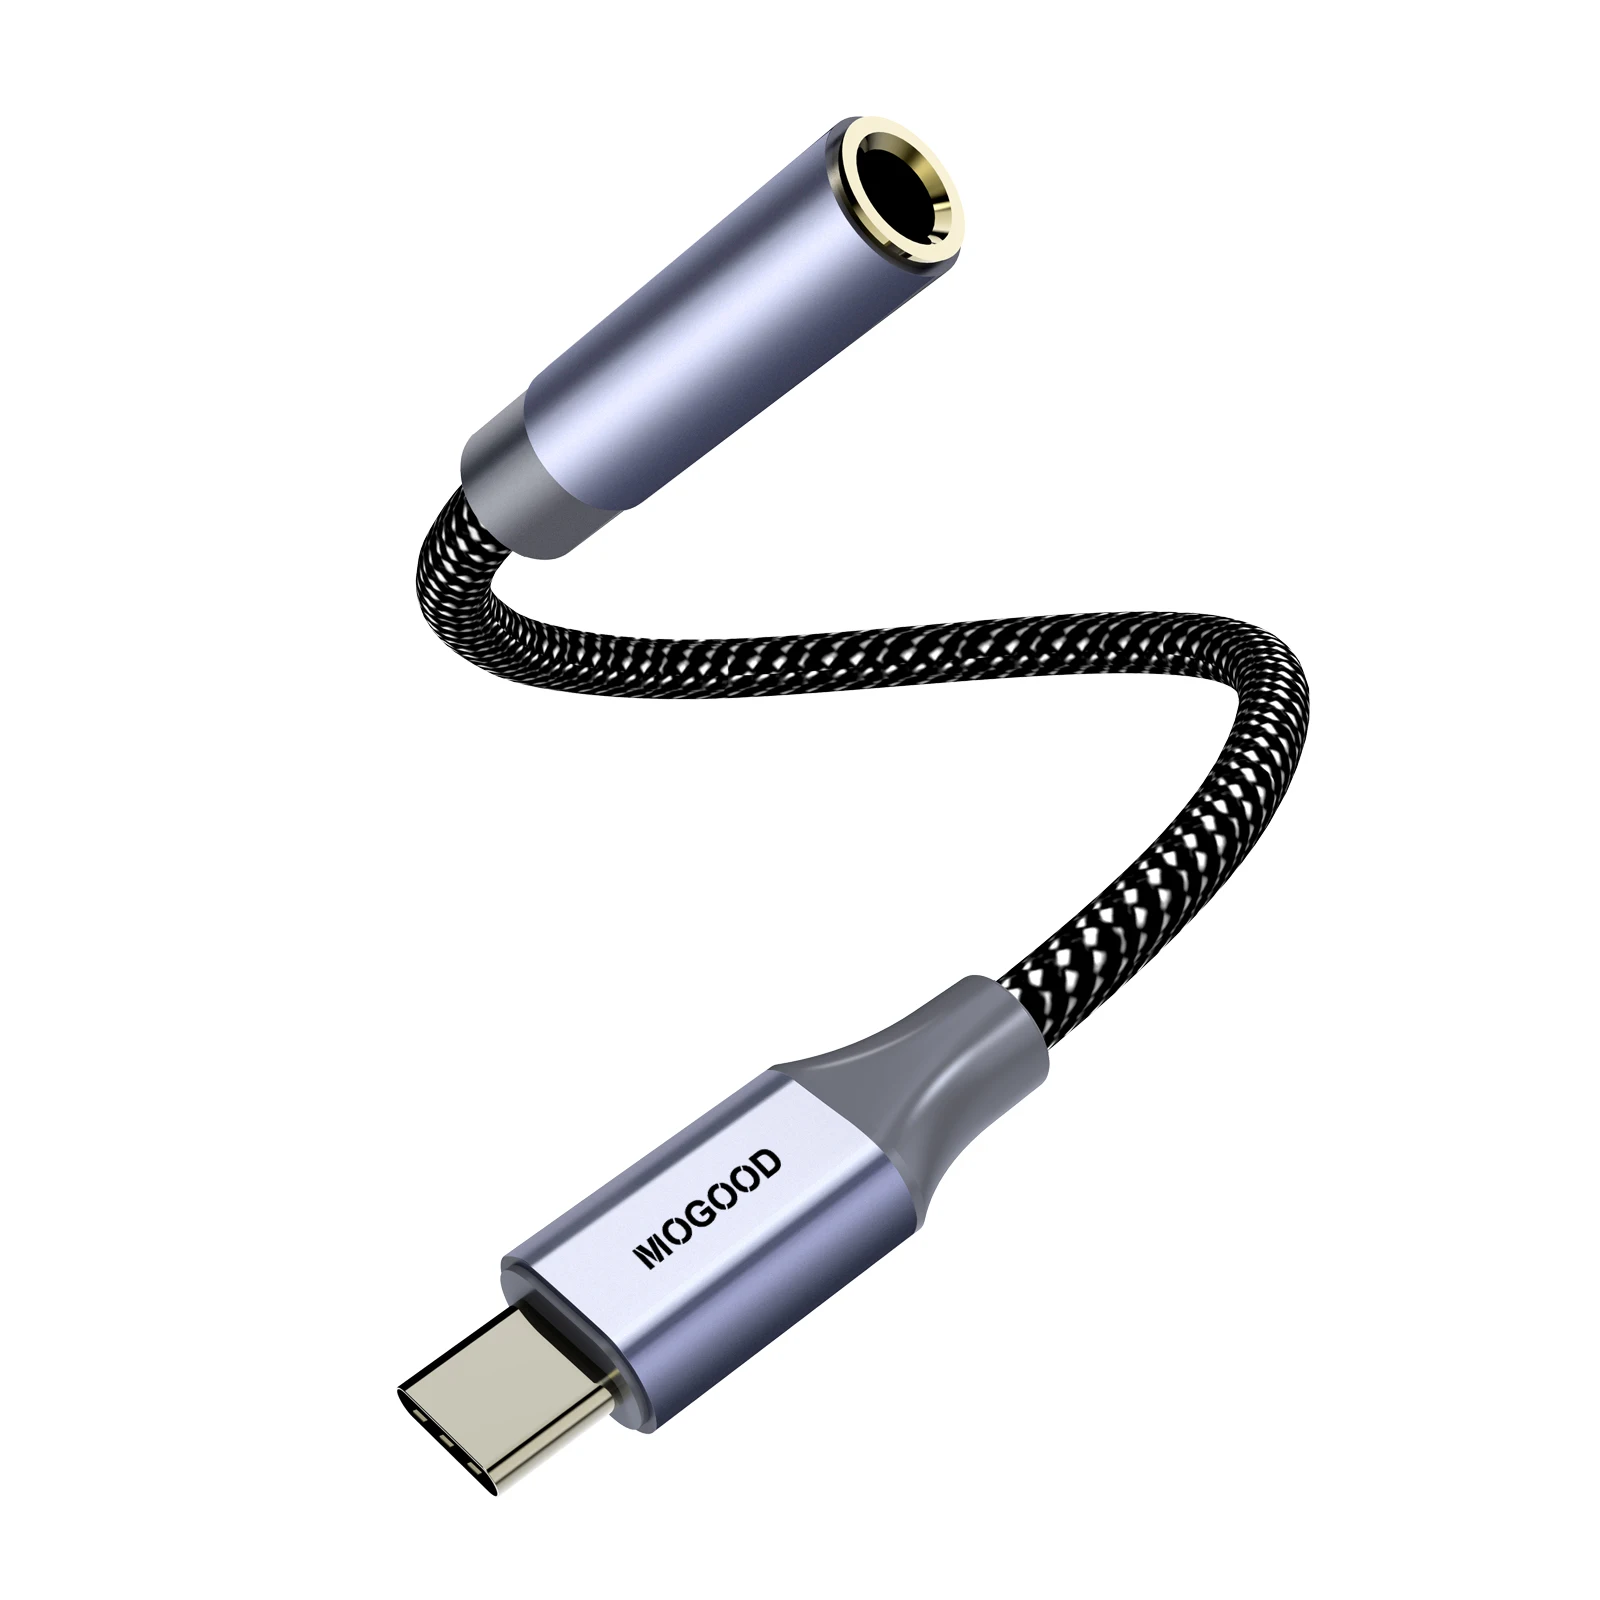 metriek soep Verenigen Type-c To 3.5 Female Moswag Audio Adapter Usb C To Aux Dongle Cable Cord Usb  Type C To 3.5mm Headphone Jack Adapter - Buy Type-c Audio Adapter,Usb C  Cable Cord,Headphone Jack Adapter